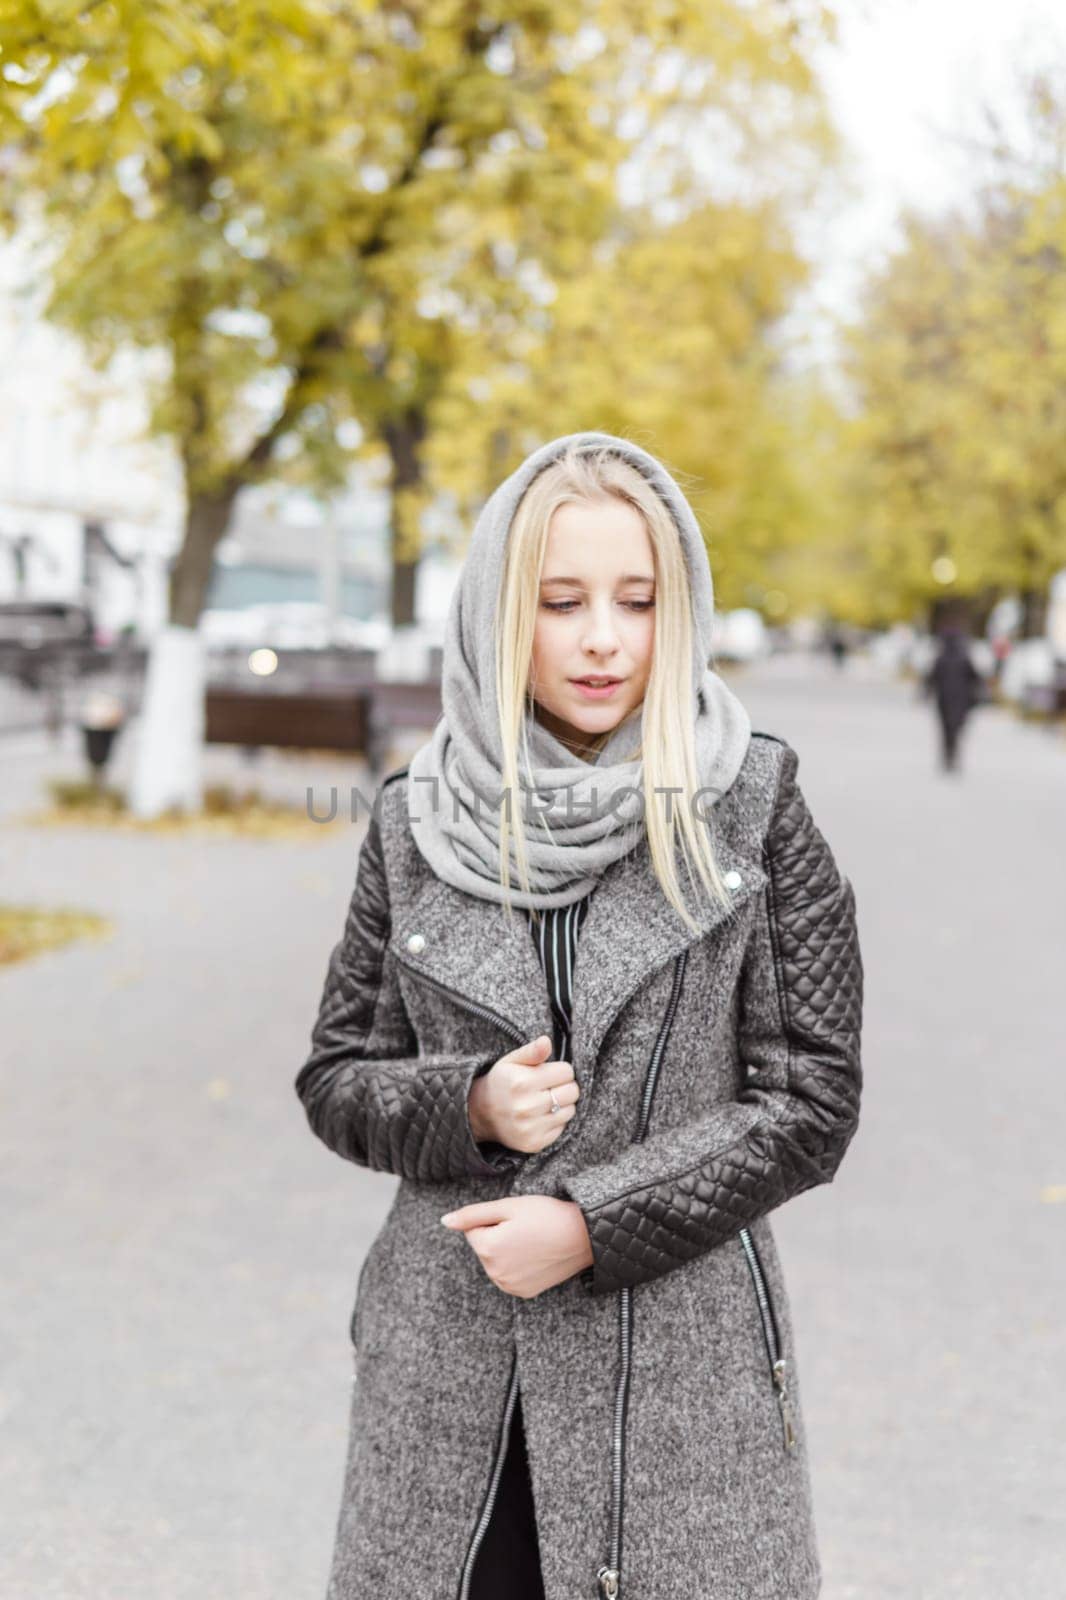 A young blonde walks through the autumn city in a gray coat. The concept of urban style and lifestyle. by Annu1tochka